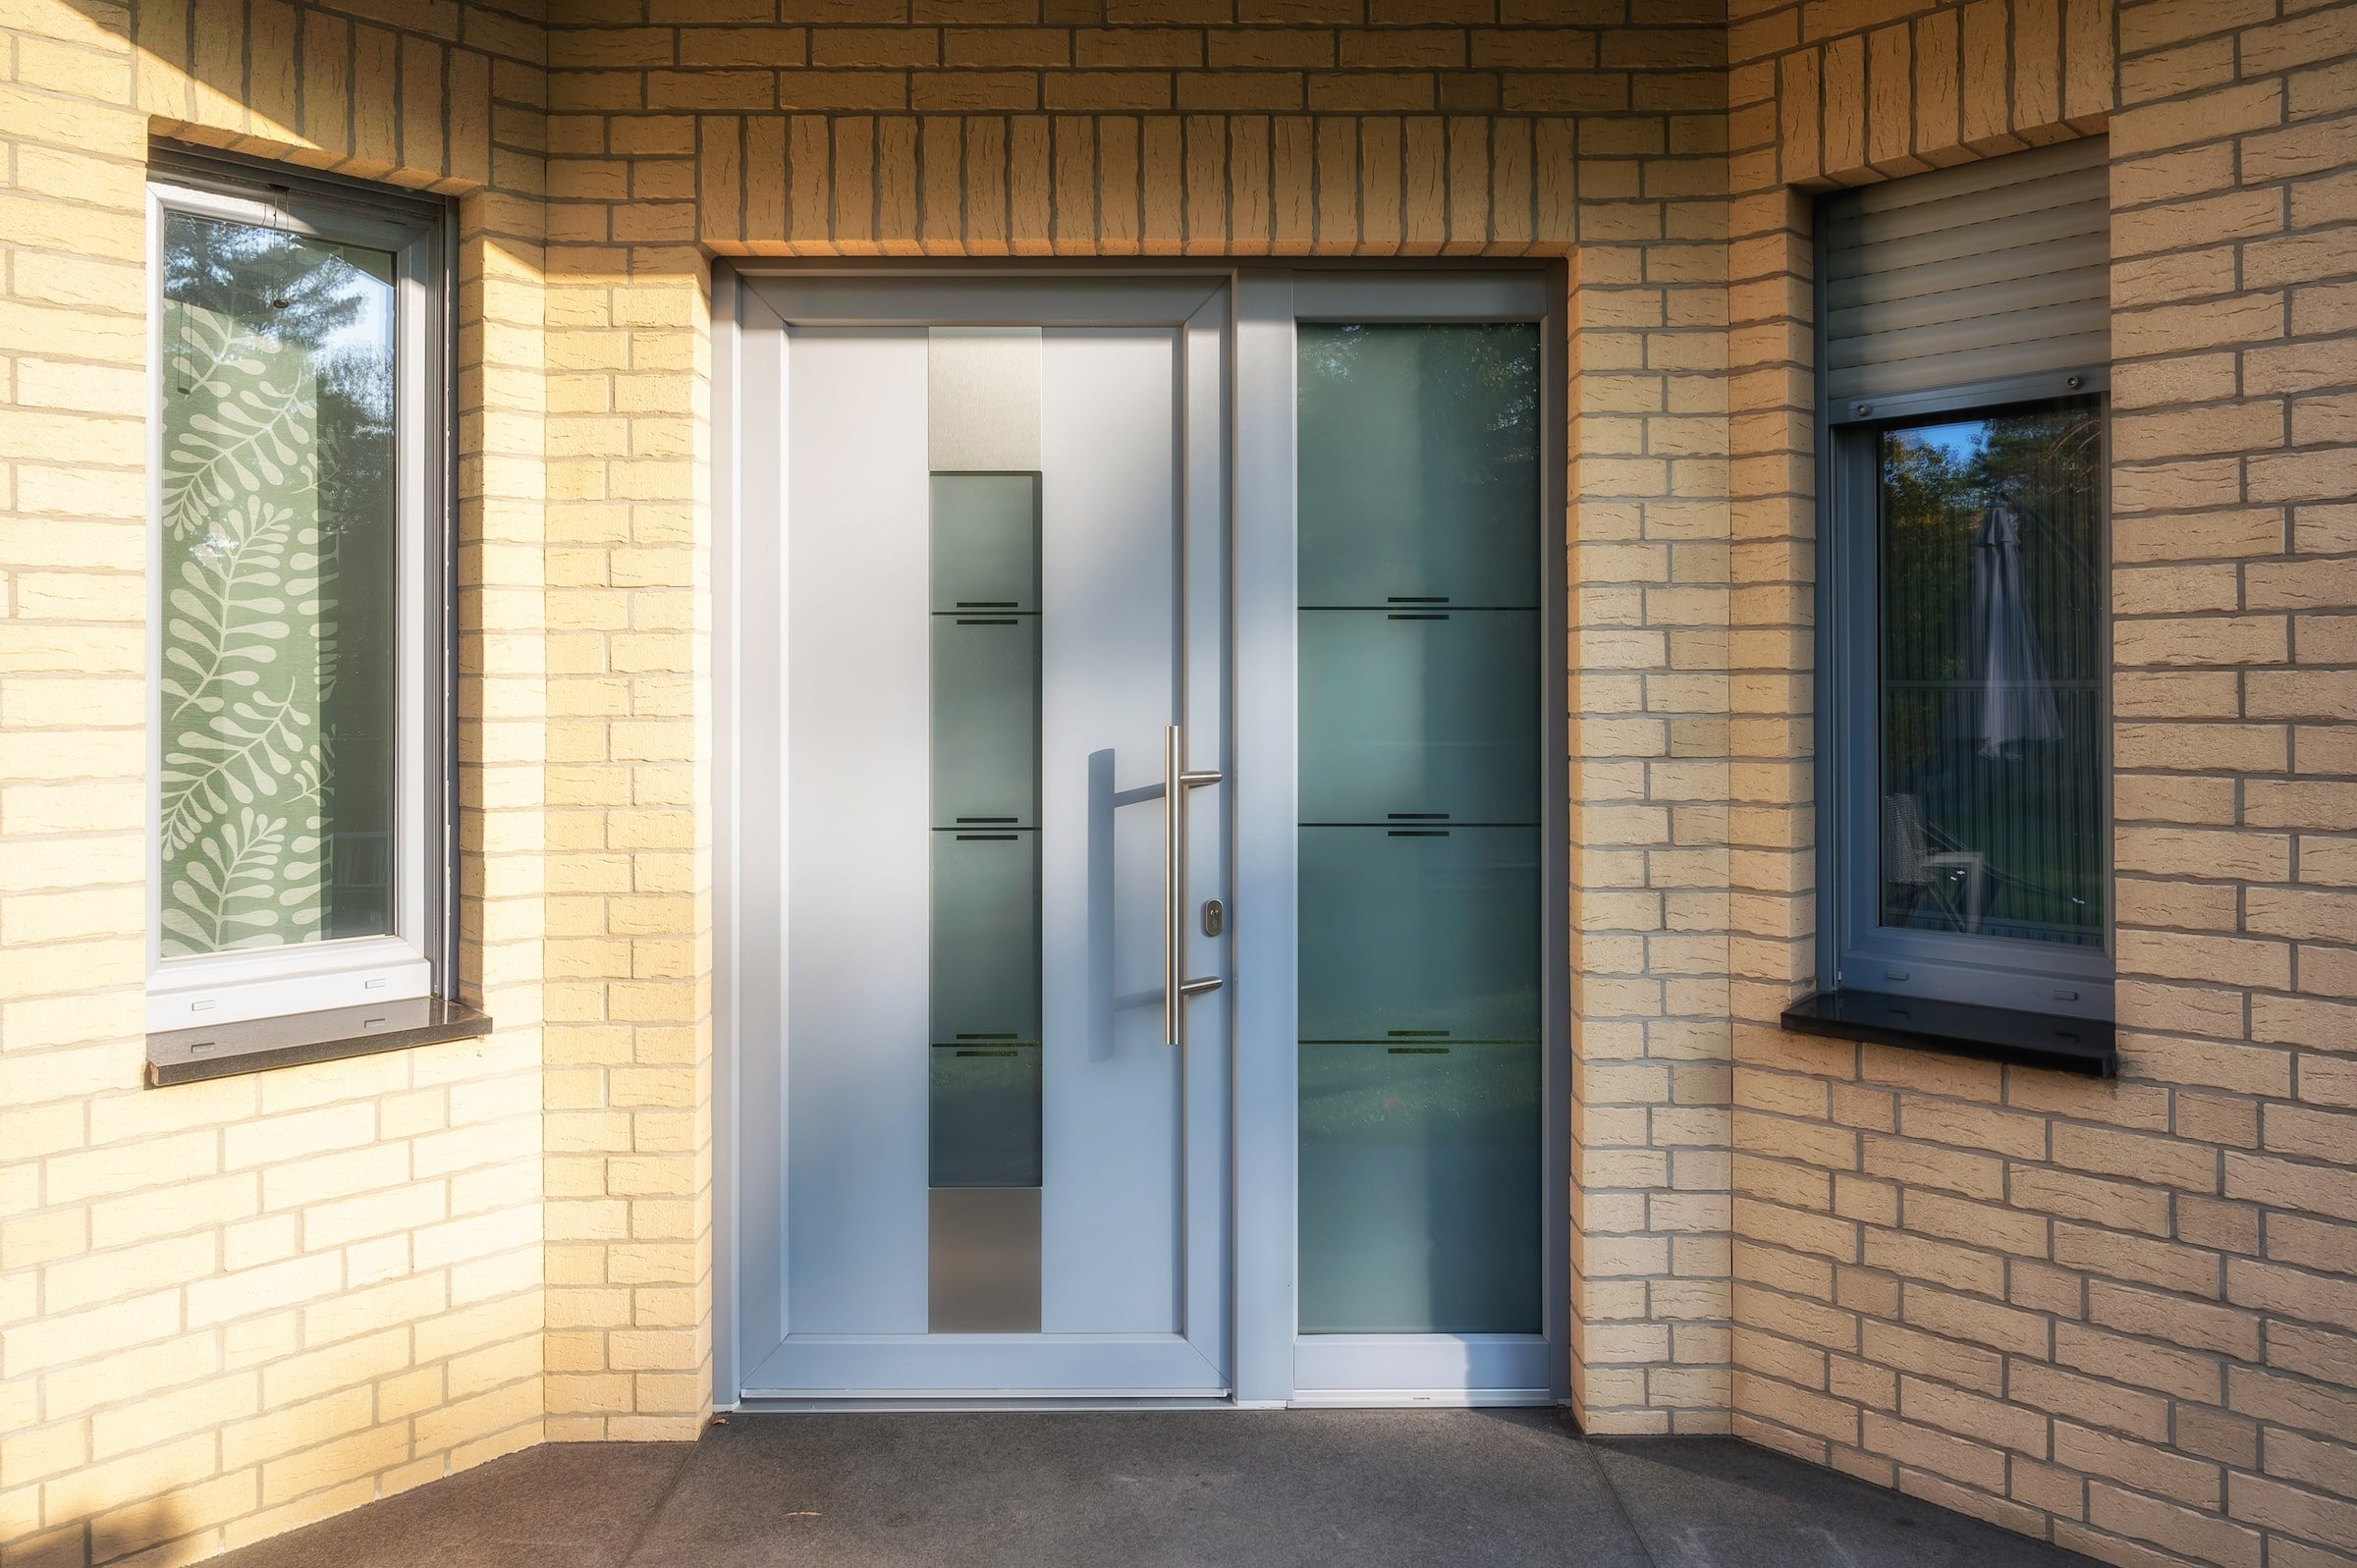 Modern house entrance door with windows for lots of light and a clinker facade